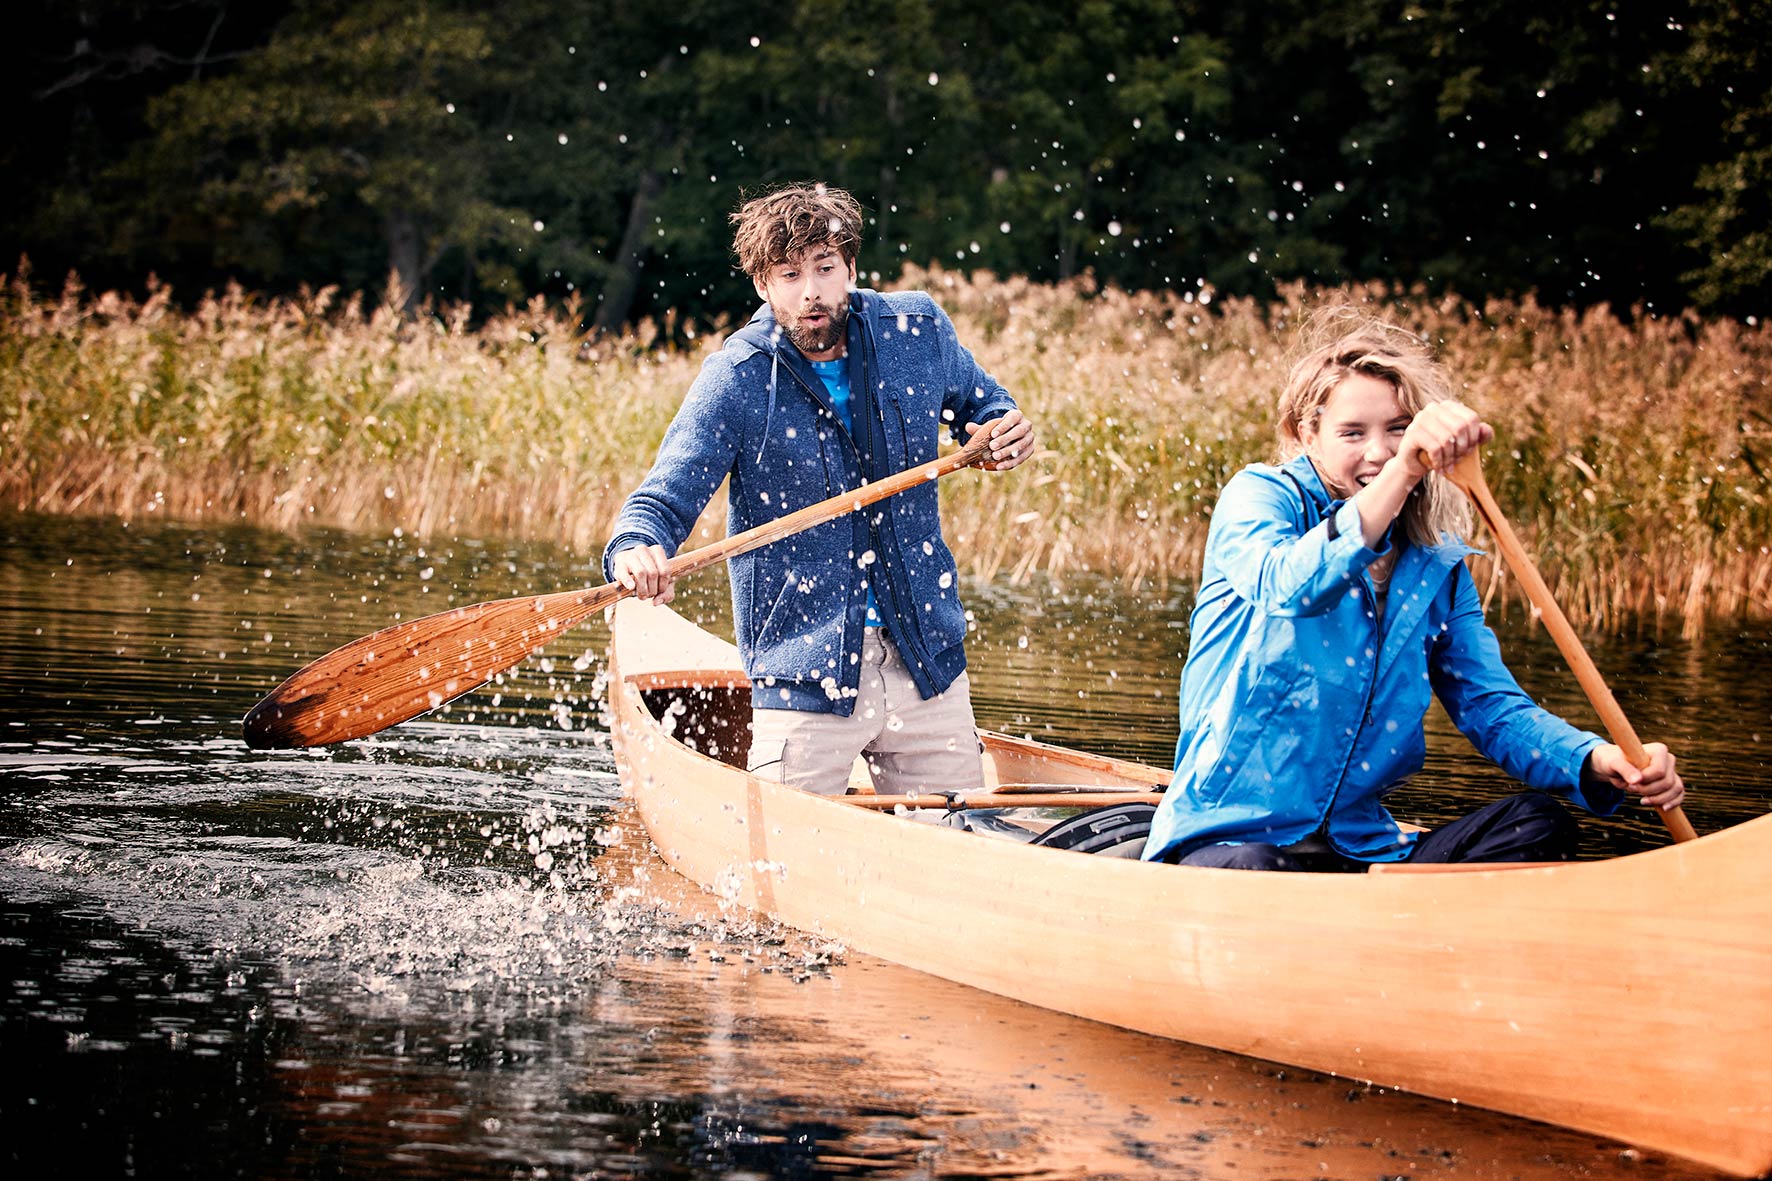 Nicklas and Hanna canoeing in a lake near Stockholm, Nicklas by mistake splashing water at Hannah sitting in front of him in the canoe.